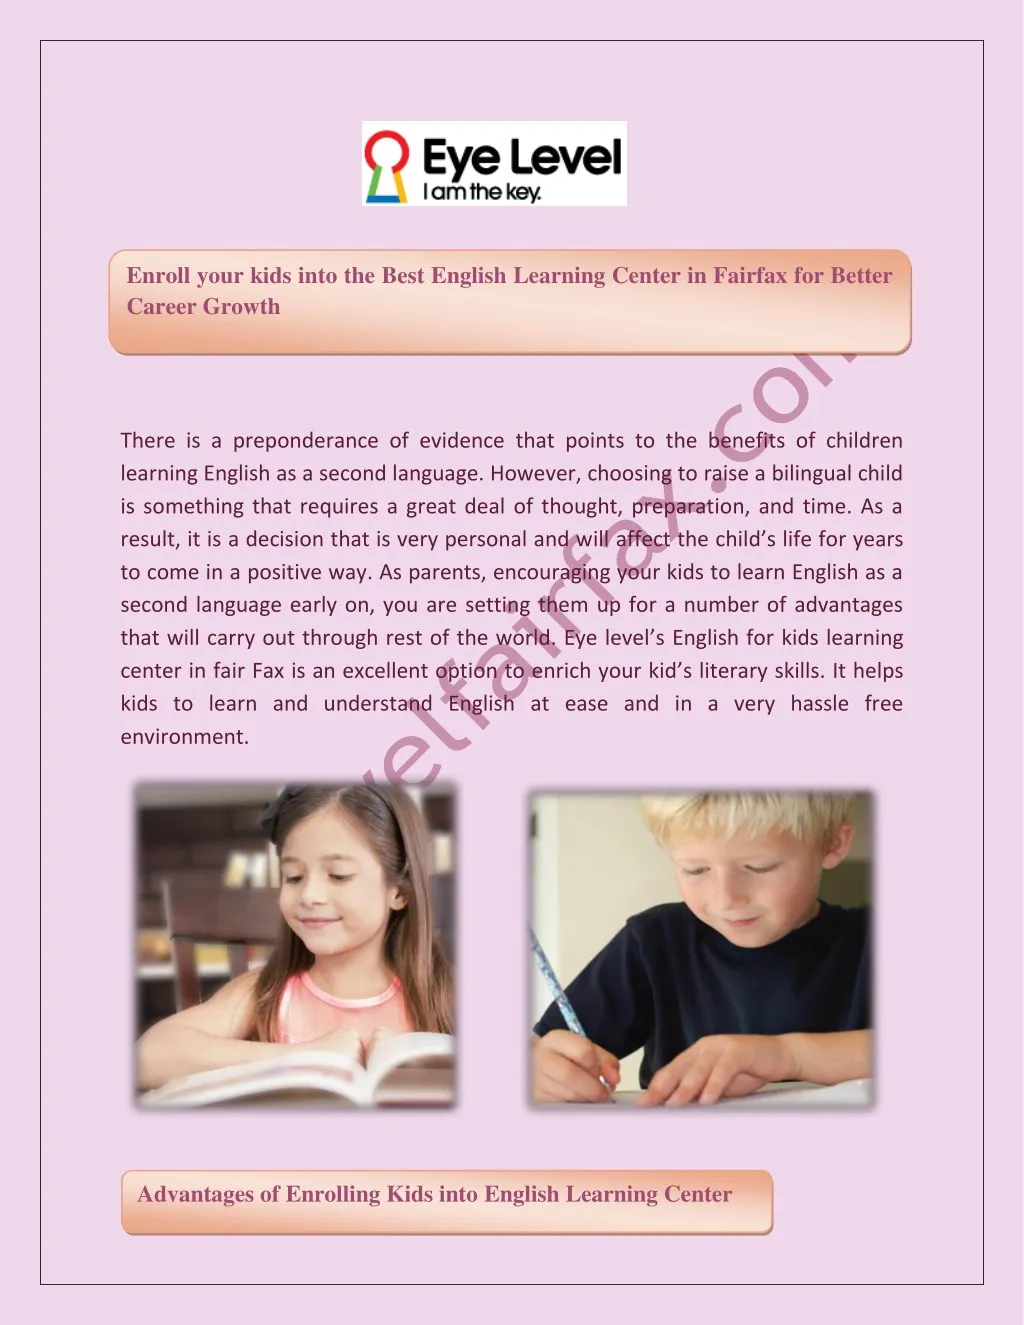 enroll your kids into the best english learning